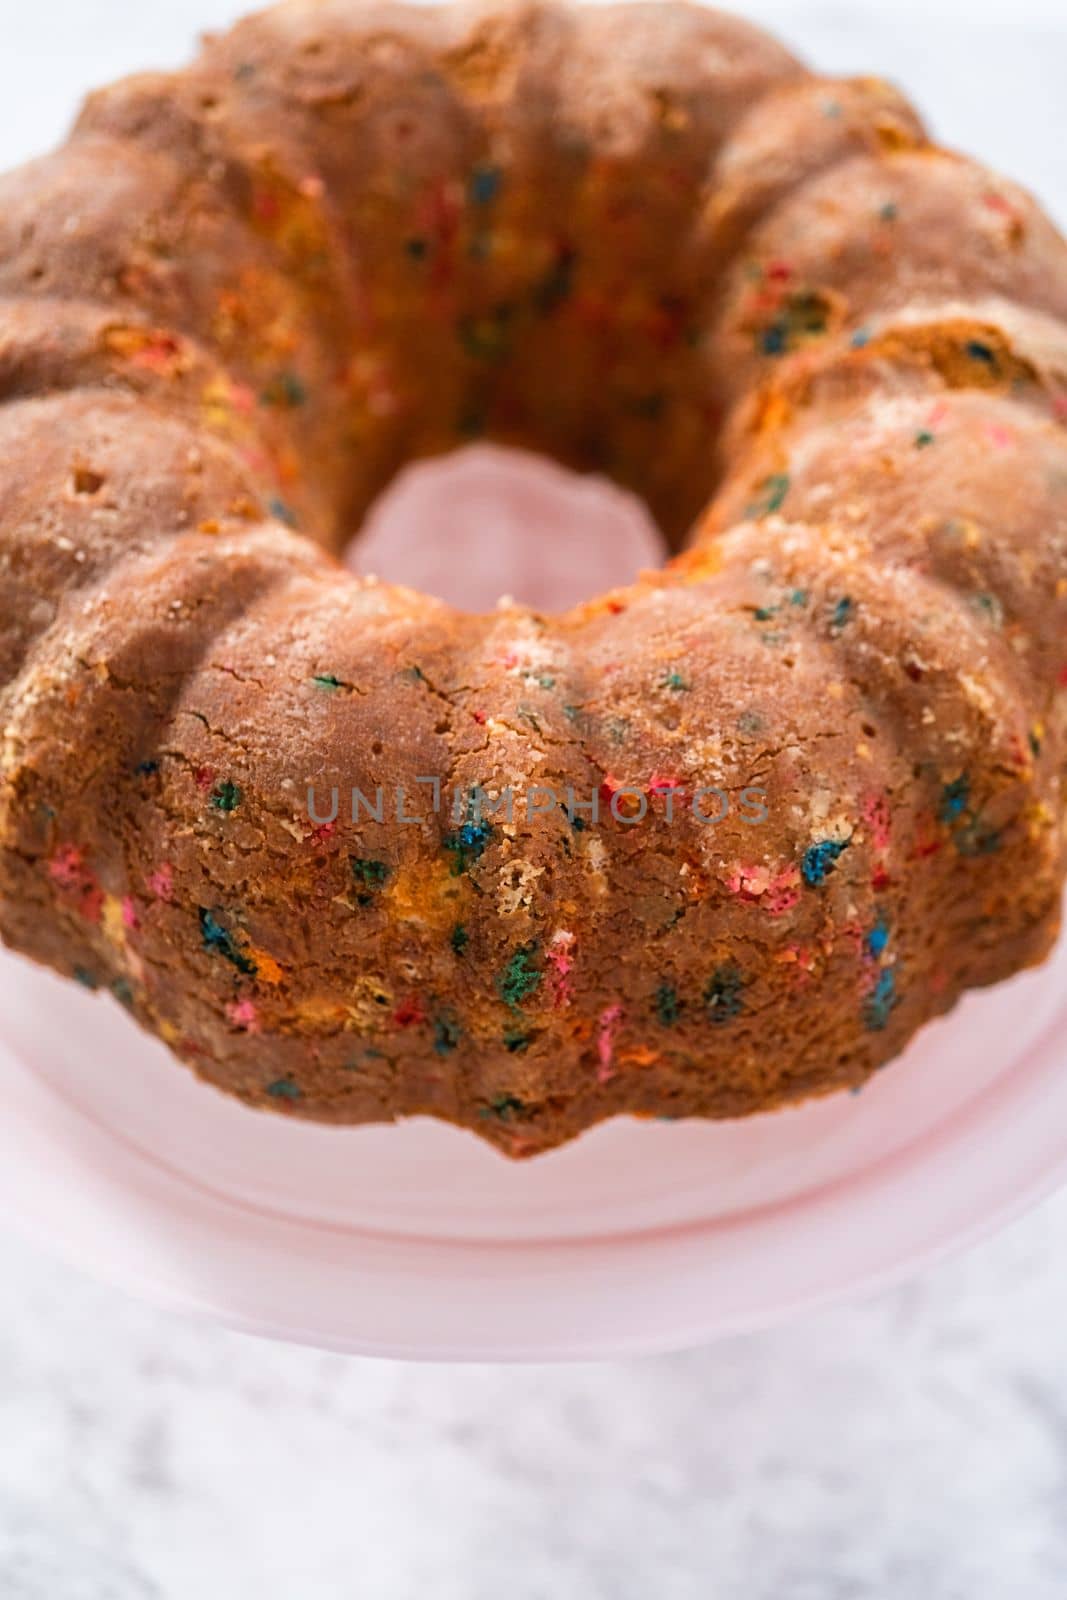 Close up view. Funfettti bundt cake prepared for frosting on a cake stand.